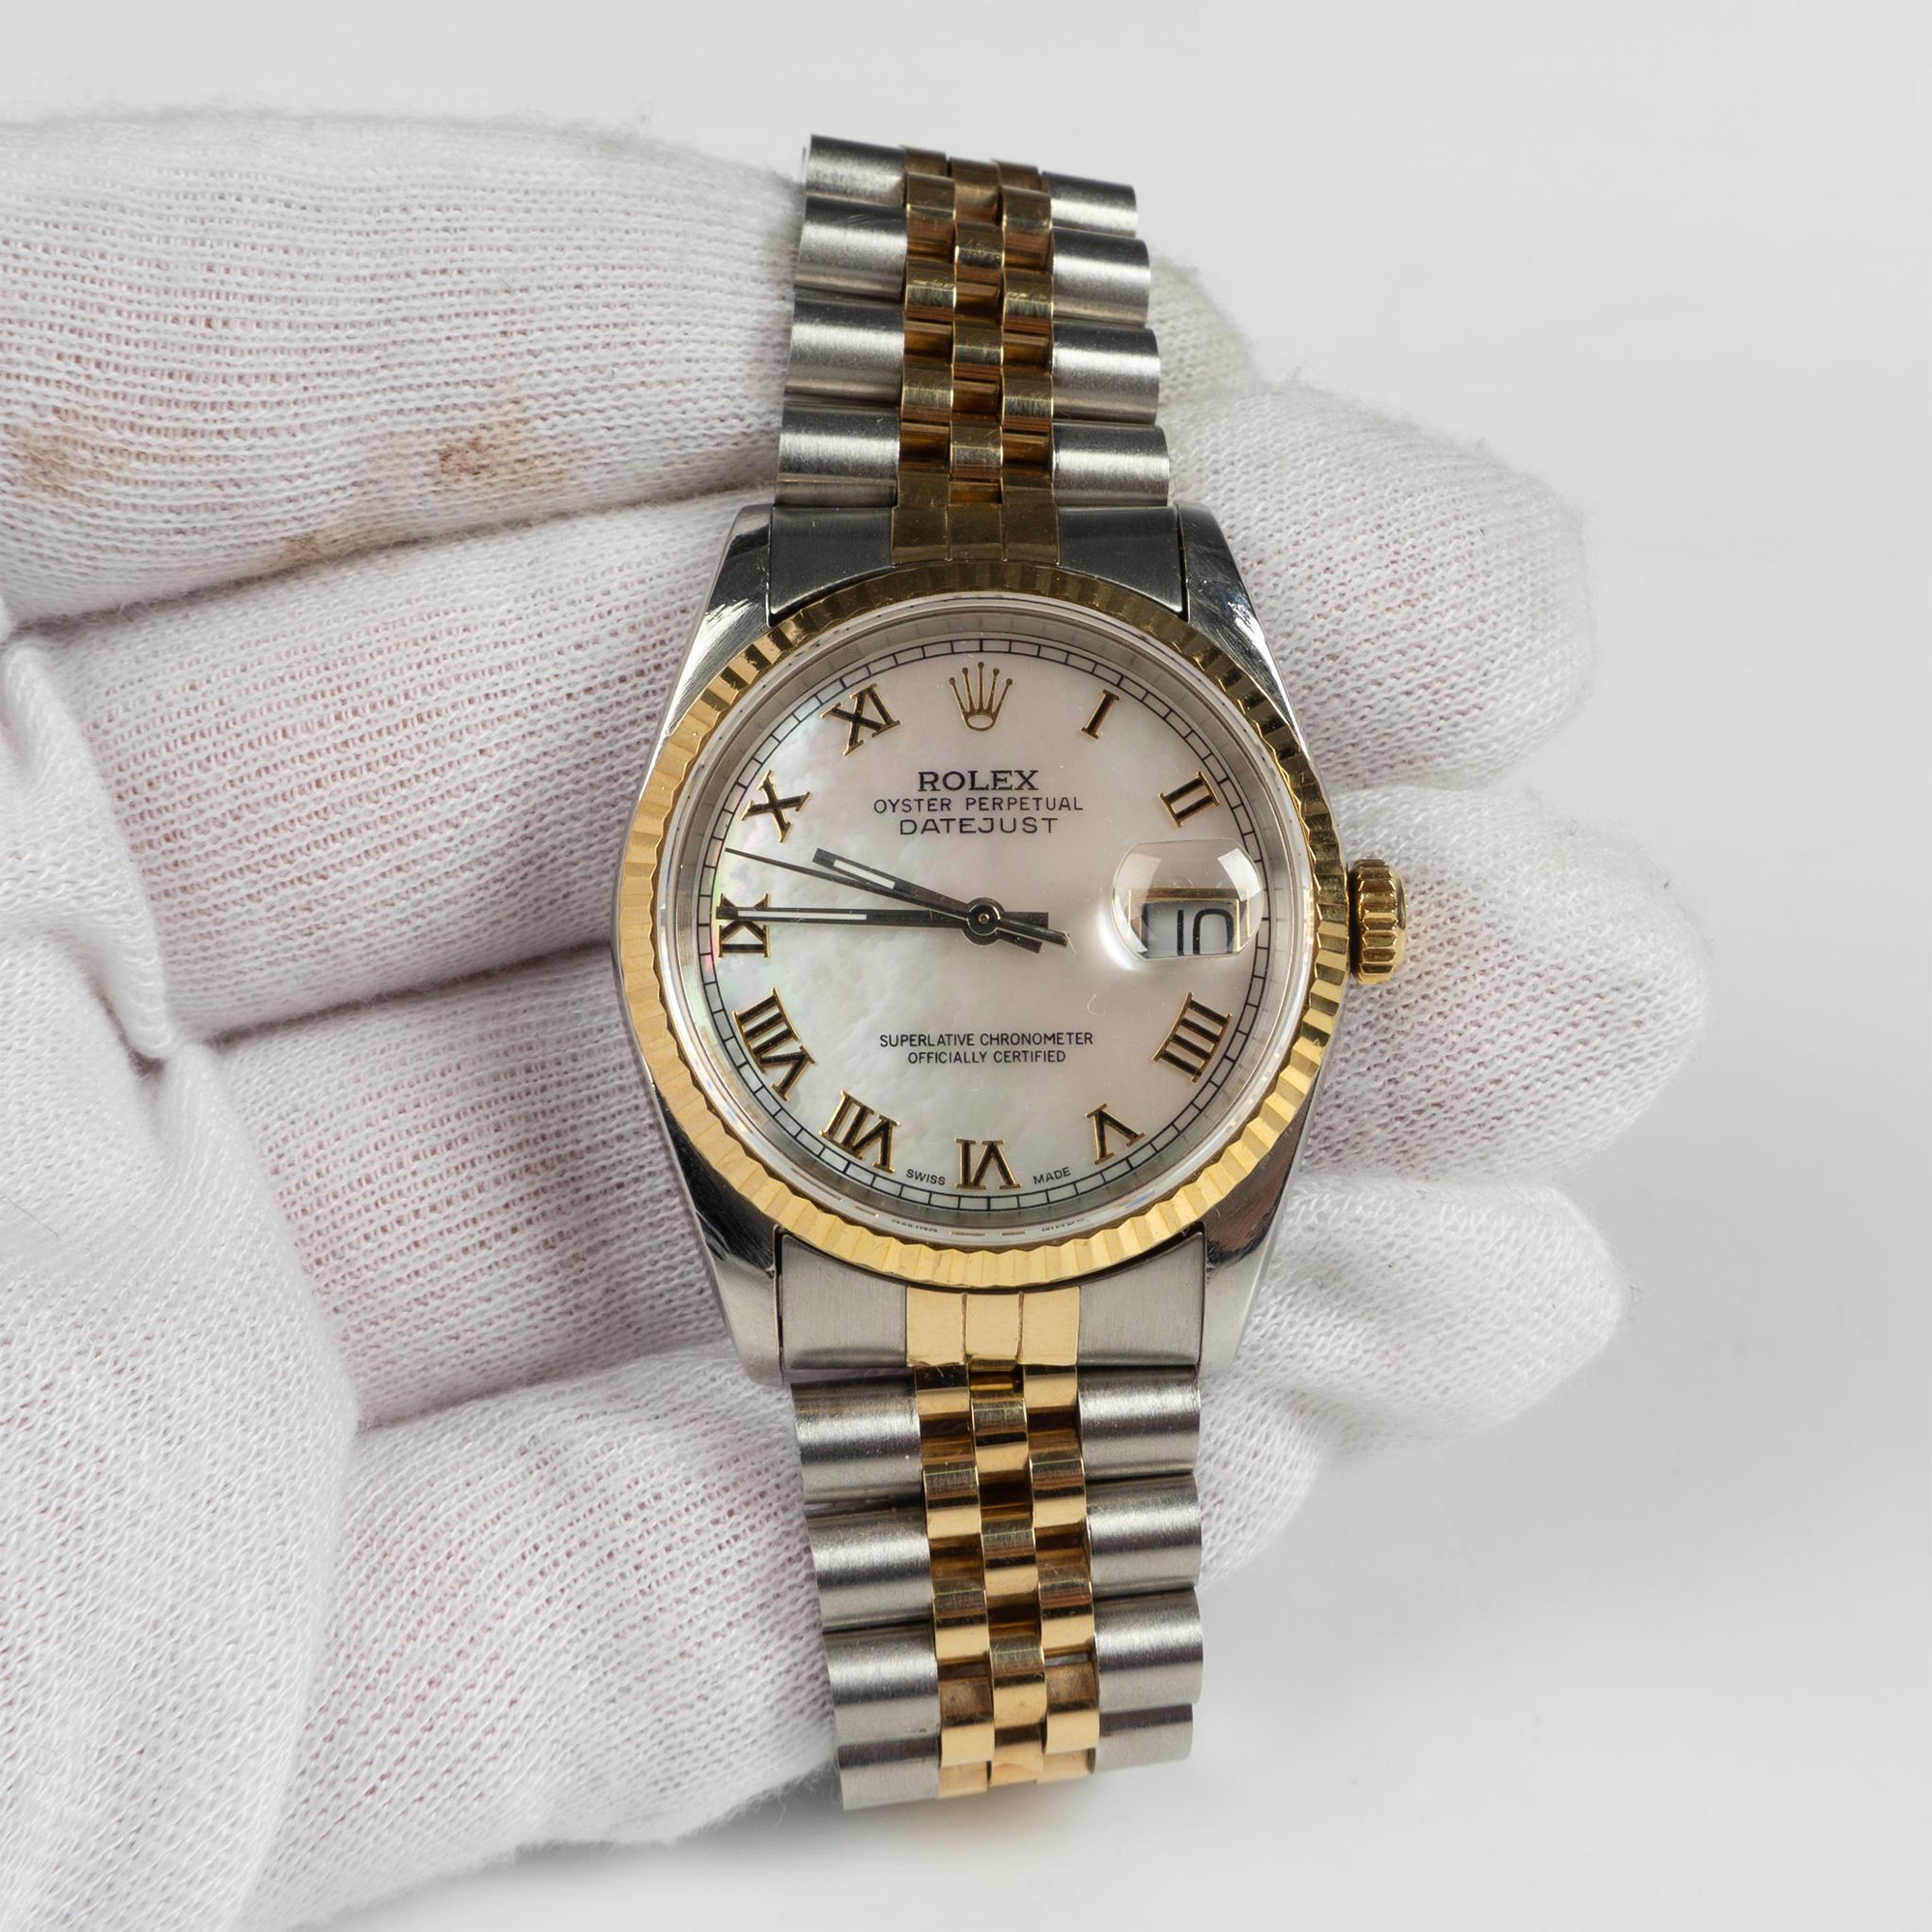 Rolex Datejust Oyster Perpetual 14K Gold Two-Tone Watch 16220 - Image 4 of 8